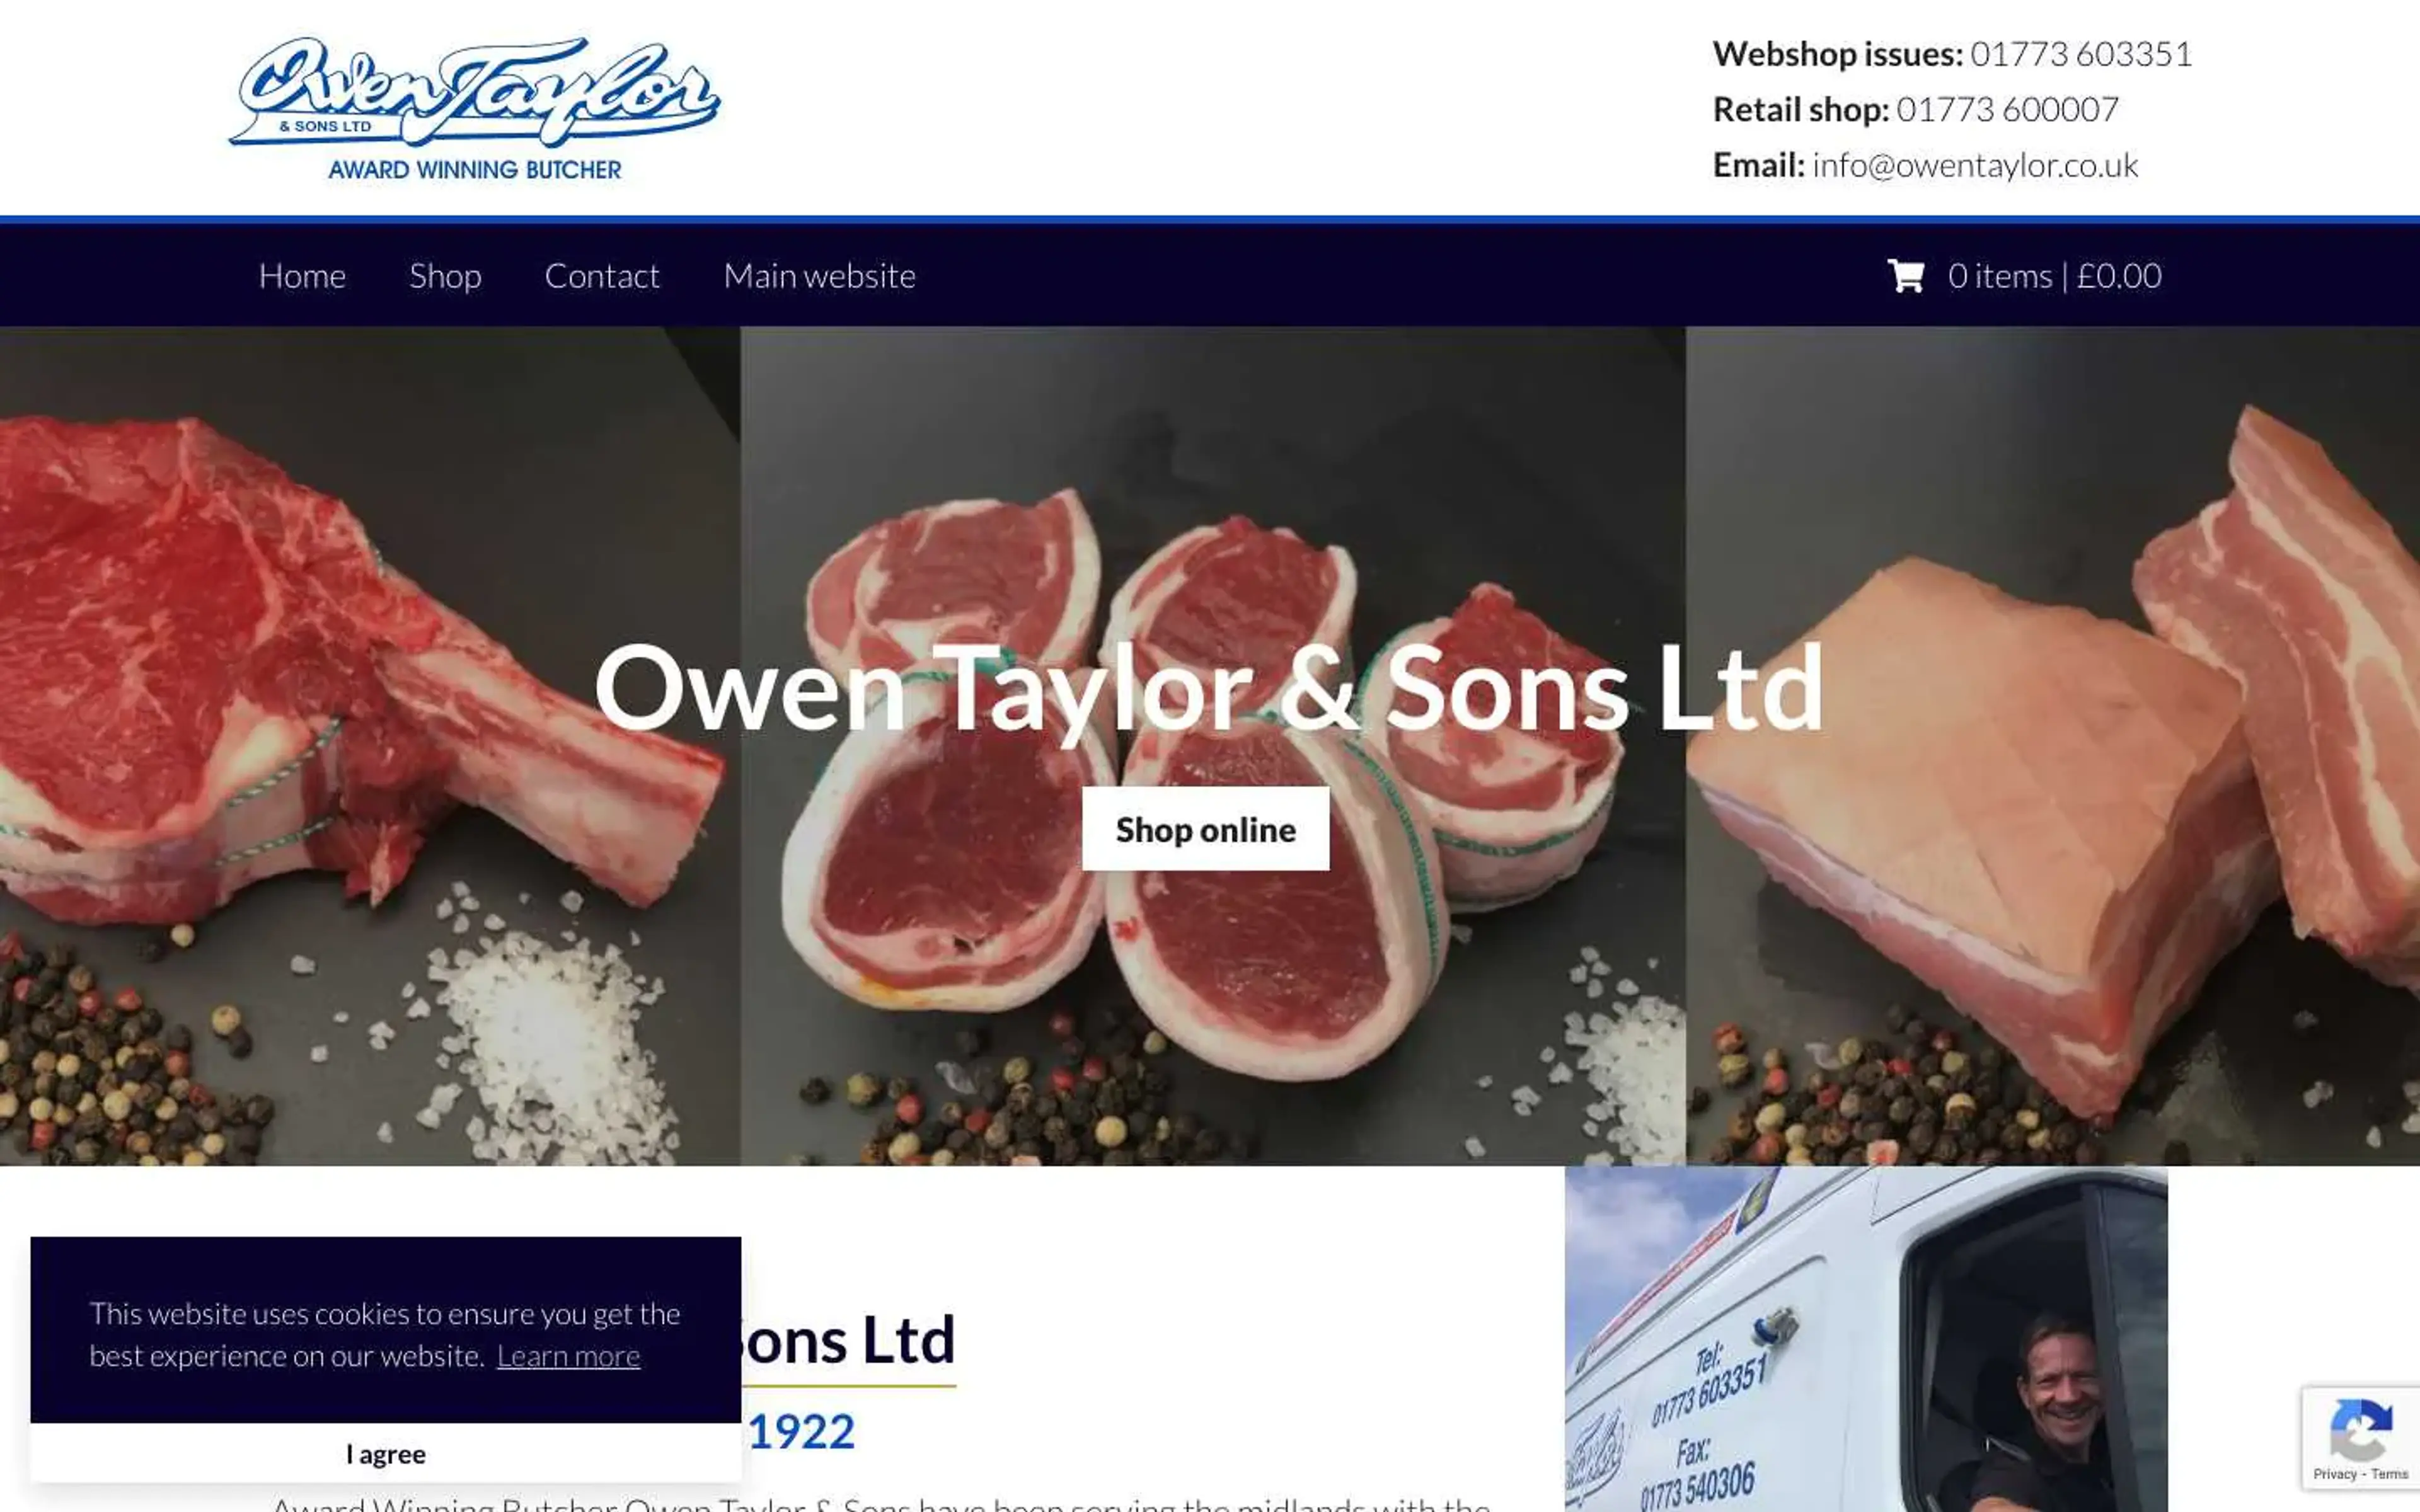 Recent project we worked on for Owen Taylor & Sons